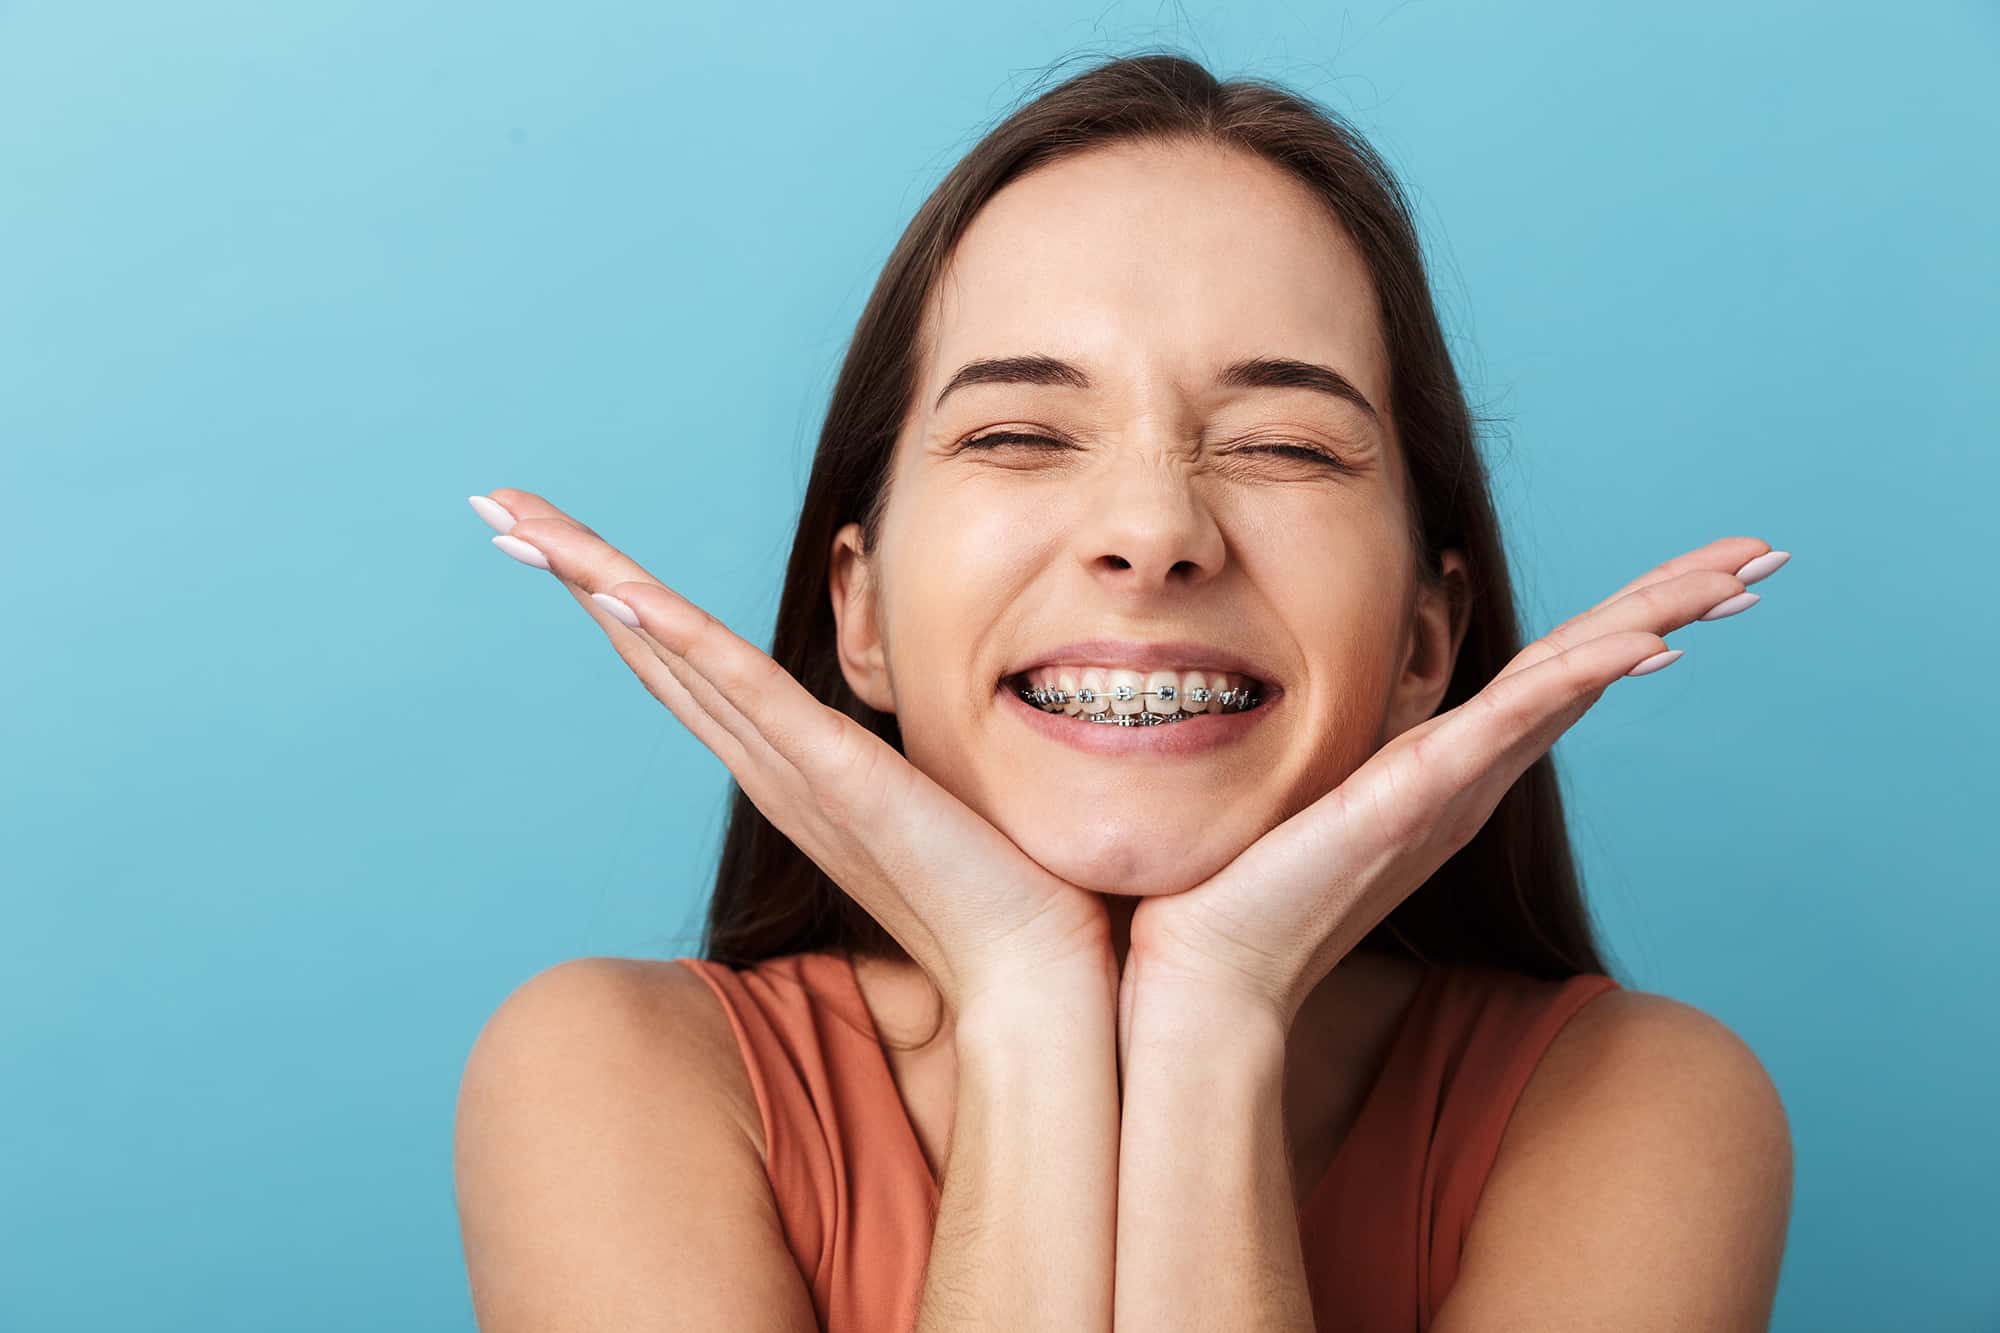 All About Orthodontics Orthodontist in South Carolina. Coastal Orthodontics Dr. Robert Garrison offers professional orthodontic services for all ages. 843-379-9200. Orthodontist in Beaufort